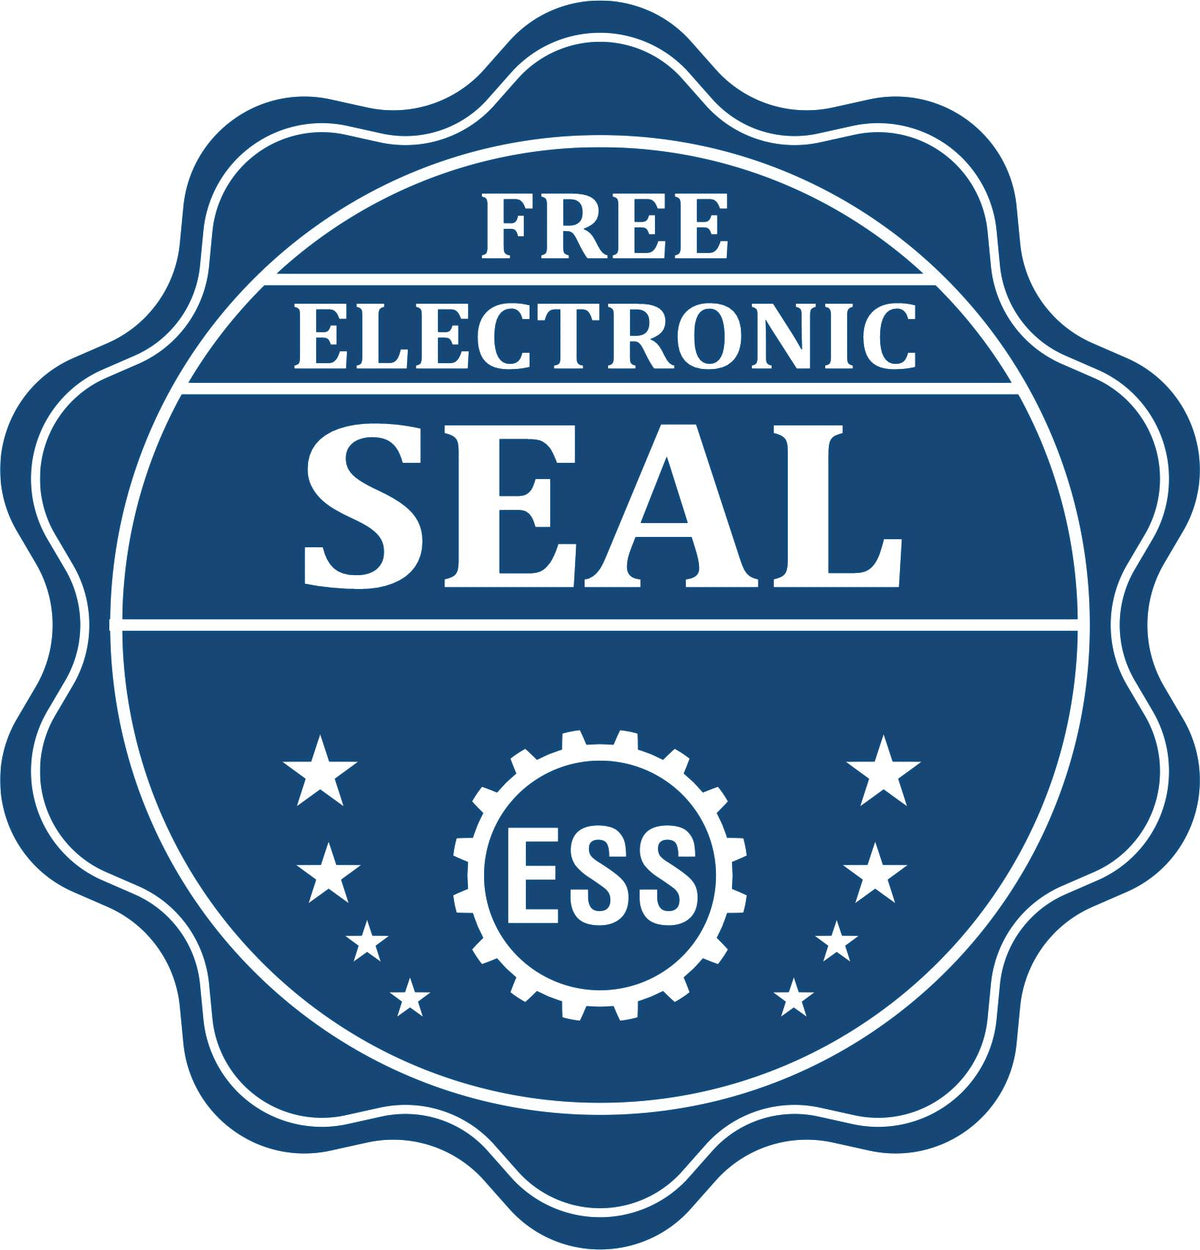 A badge showing a free electronic seal for the PSI Alaska Notary Stamp with stars and the ESS gear on the emblem.